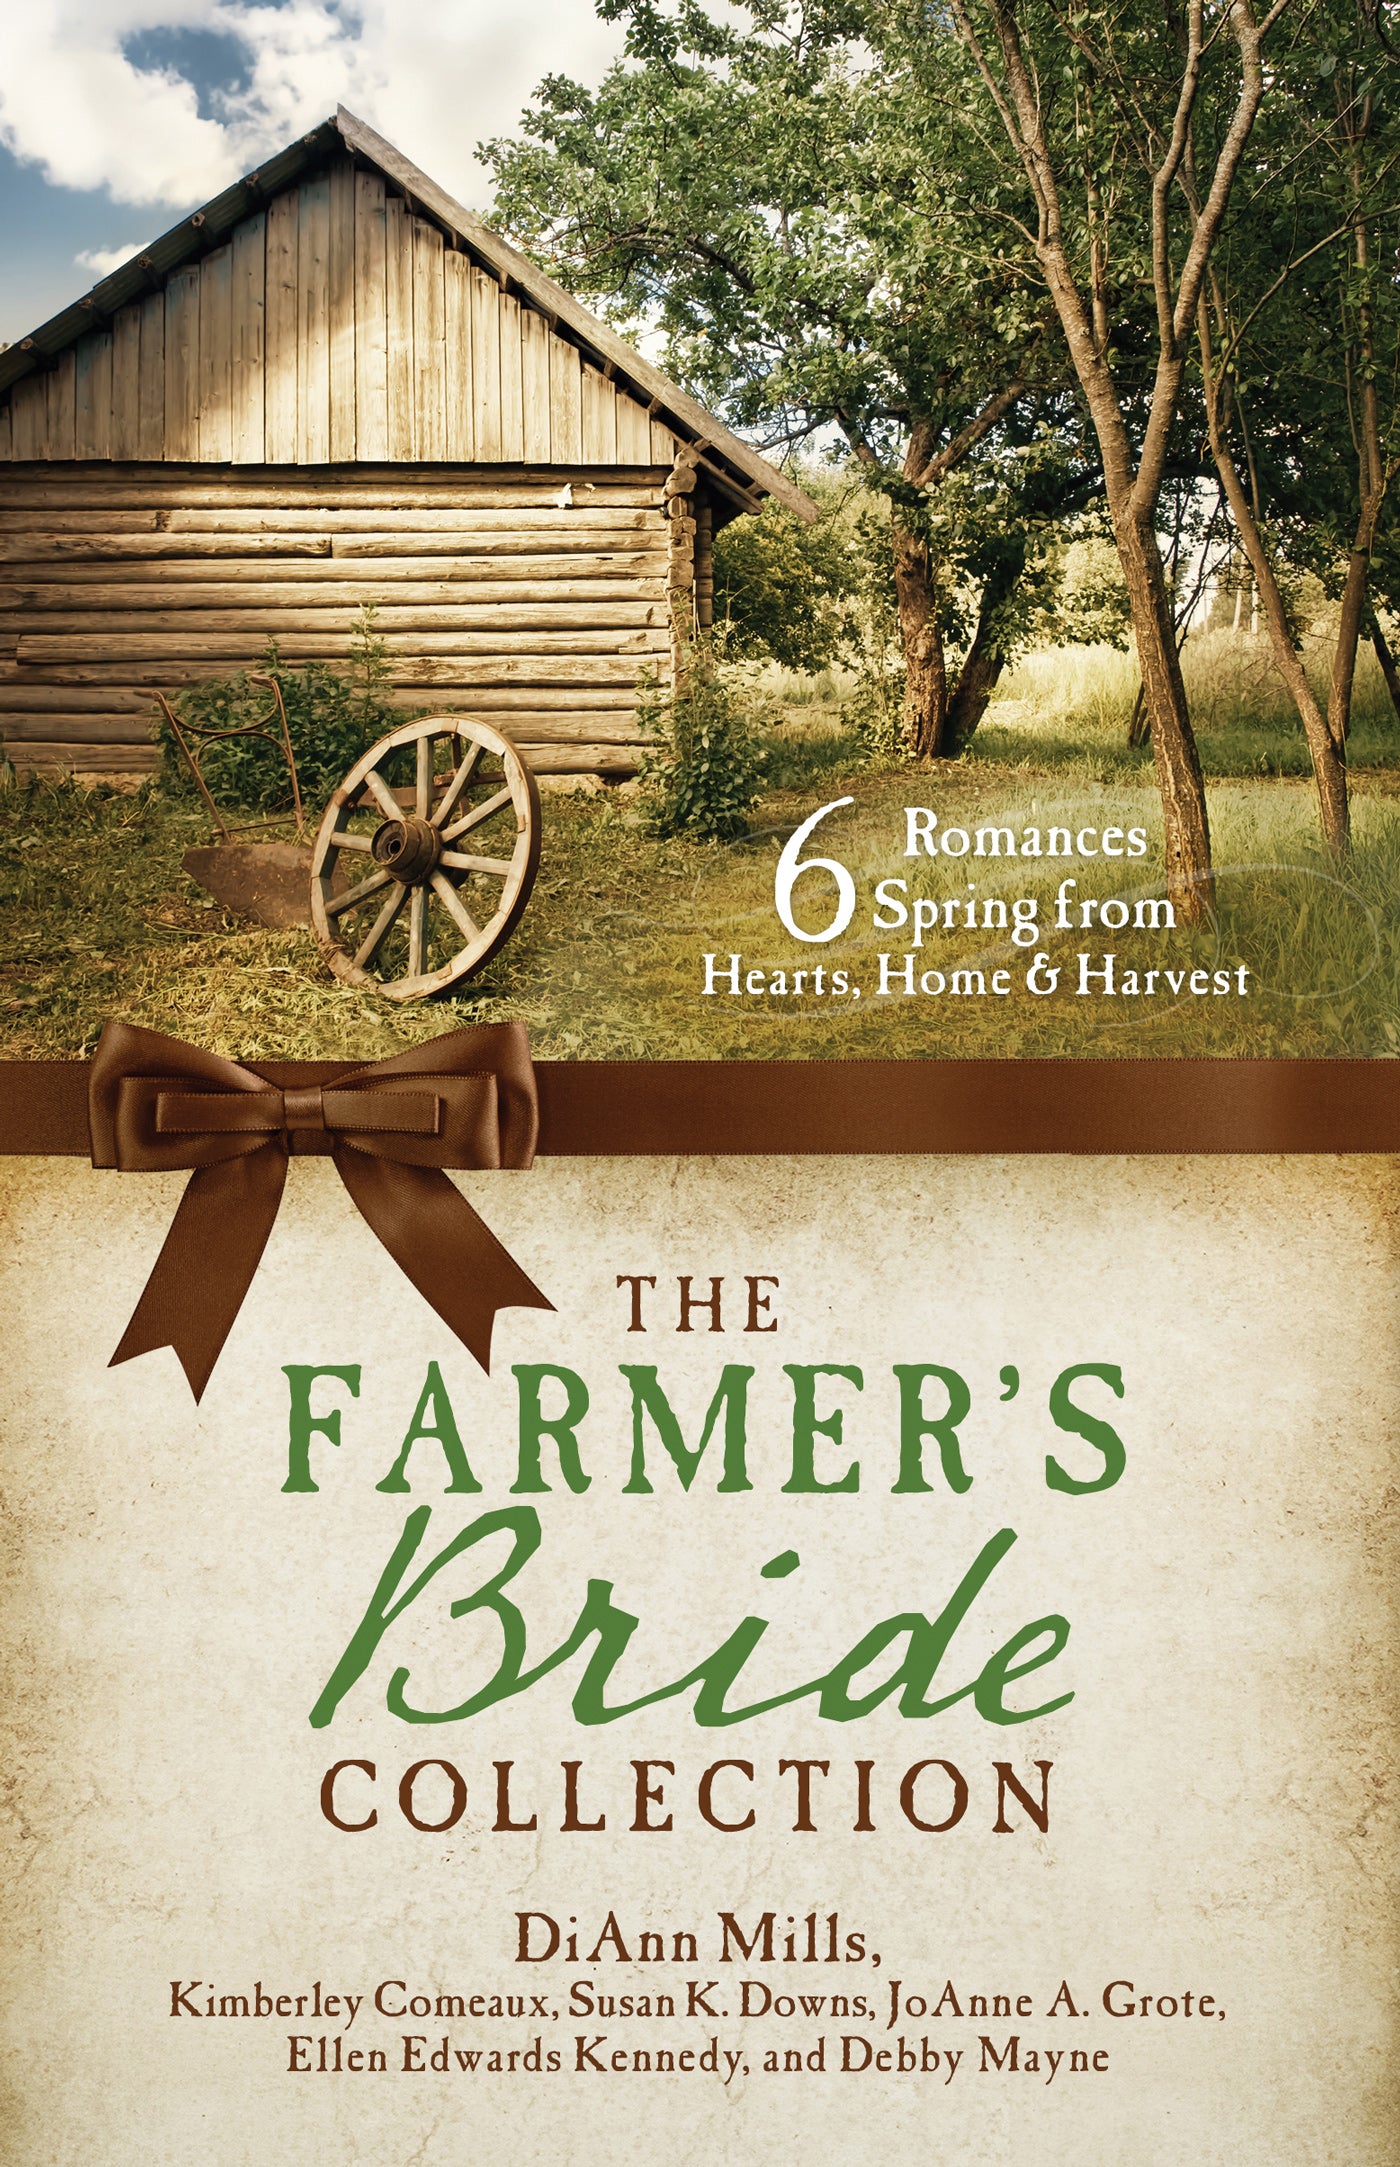 The Farmer's Bride Collection - The Christian Gift Company